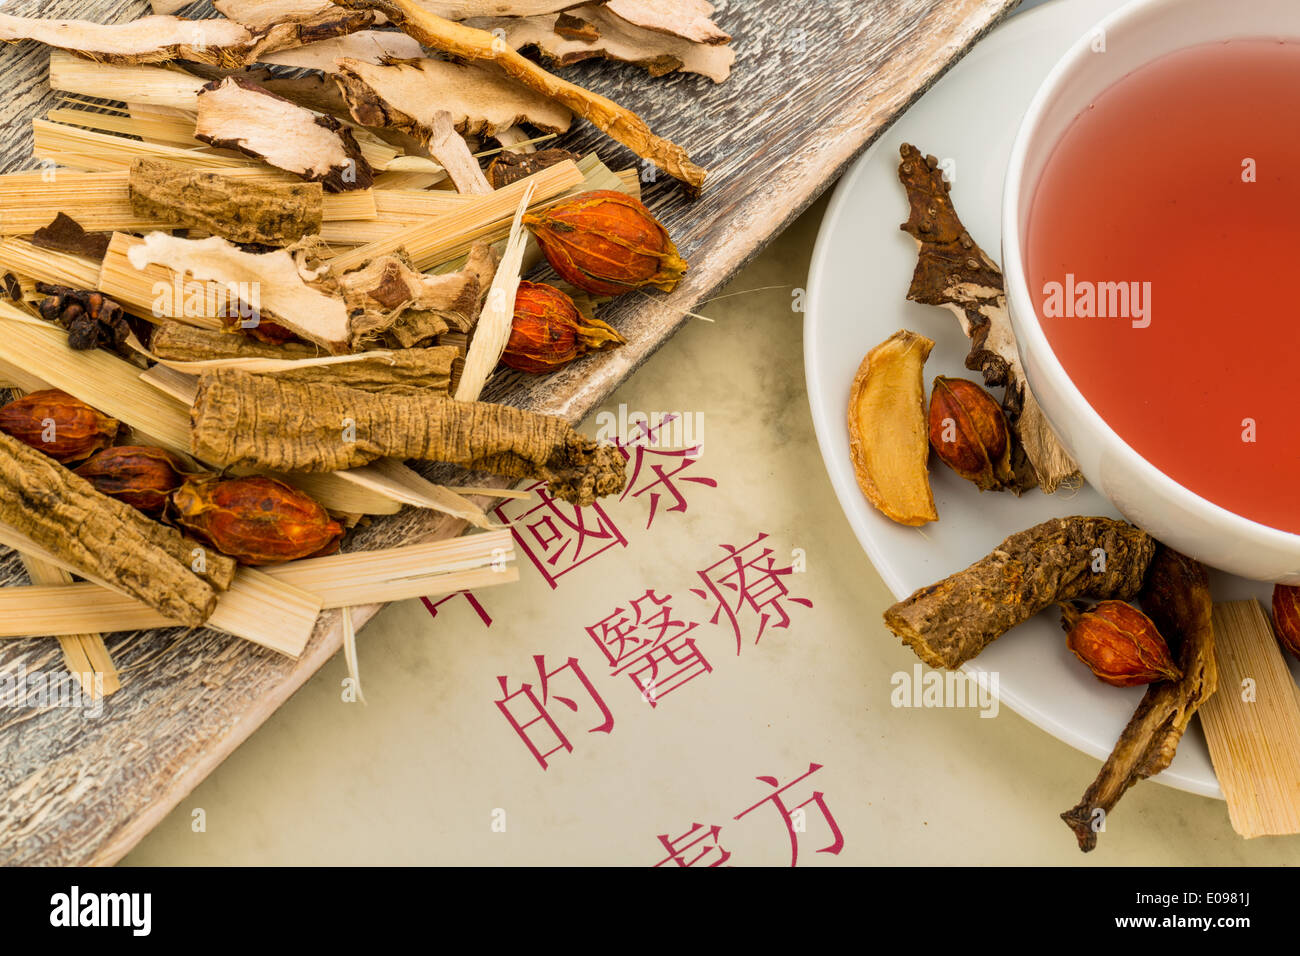 Ingredients for a tea in the traditional Chinese medicine. Healing of illnesses by alternative methods., Zutaten fuer einen Tee Stock Photo